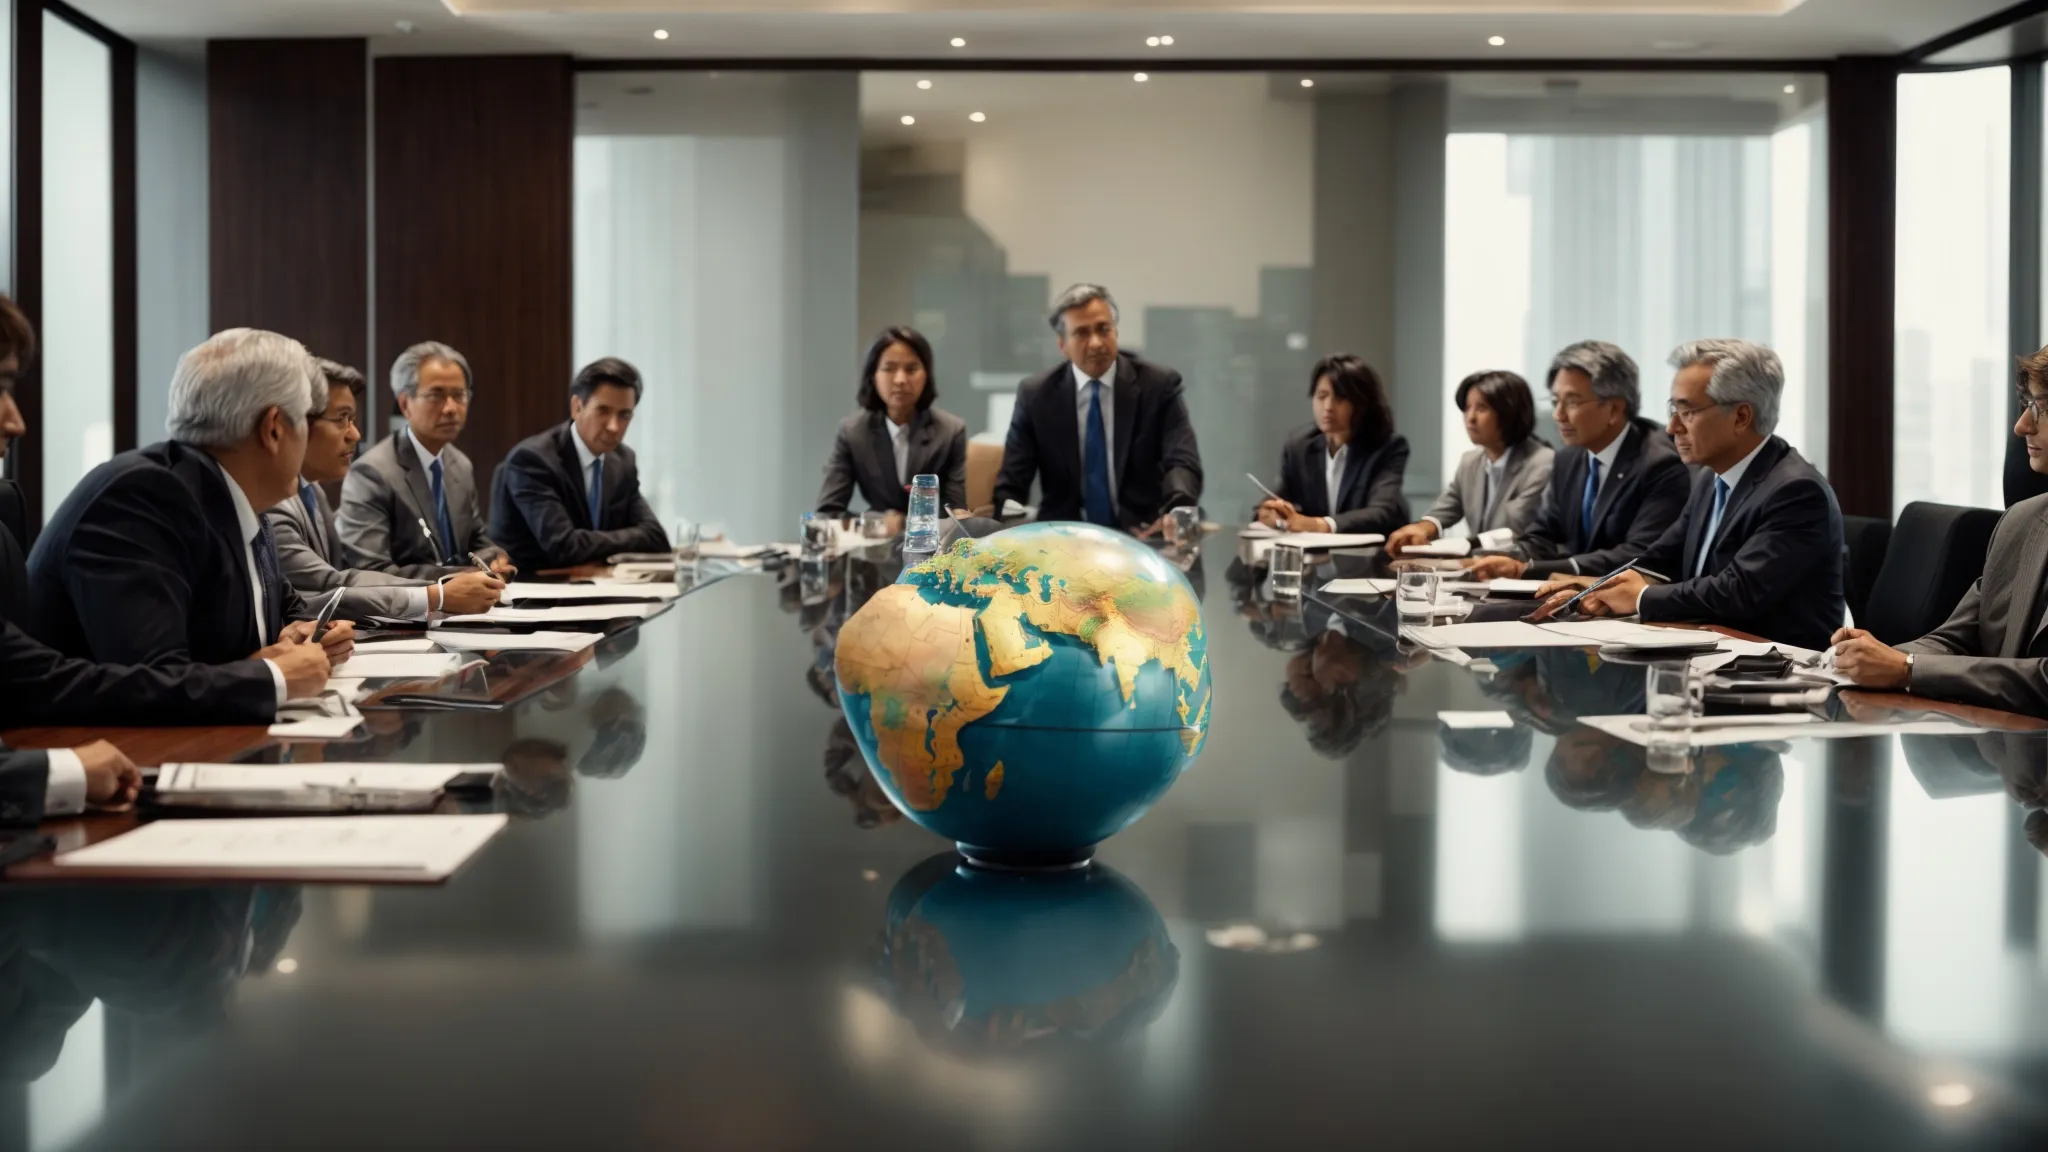 a group of professionals gathered around a conference table focused on documents and a globe, symbolizing international agreement discussions.